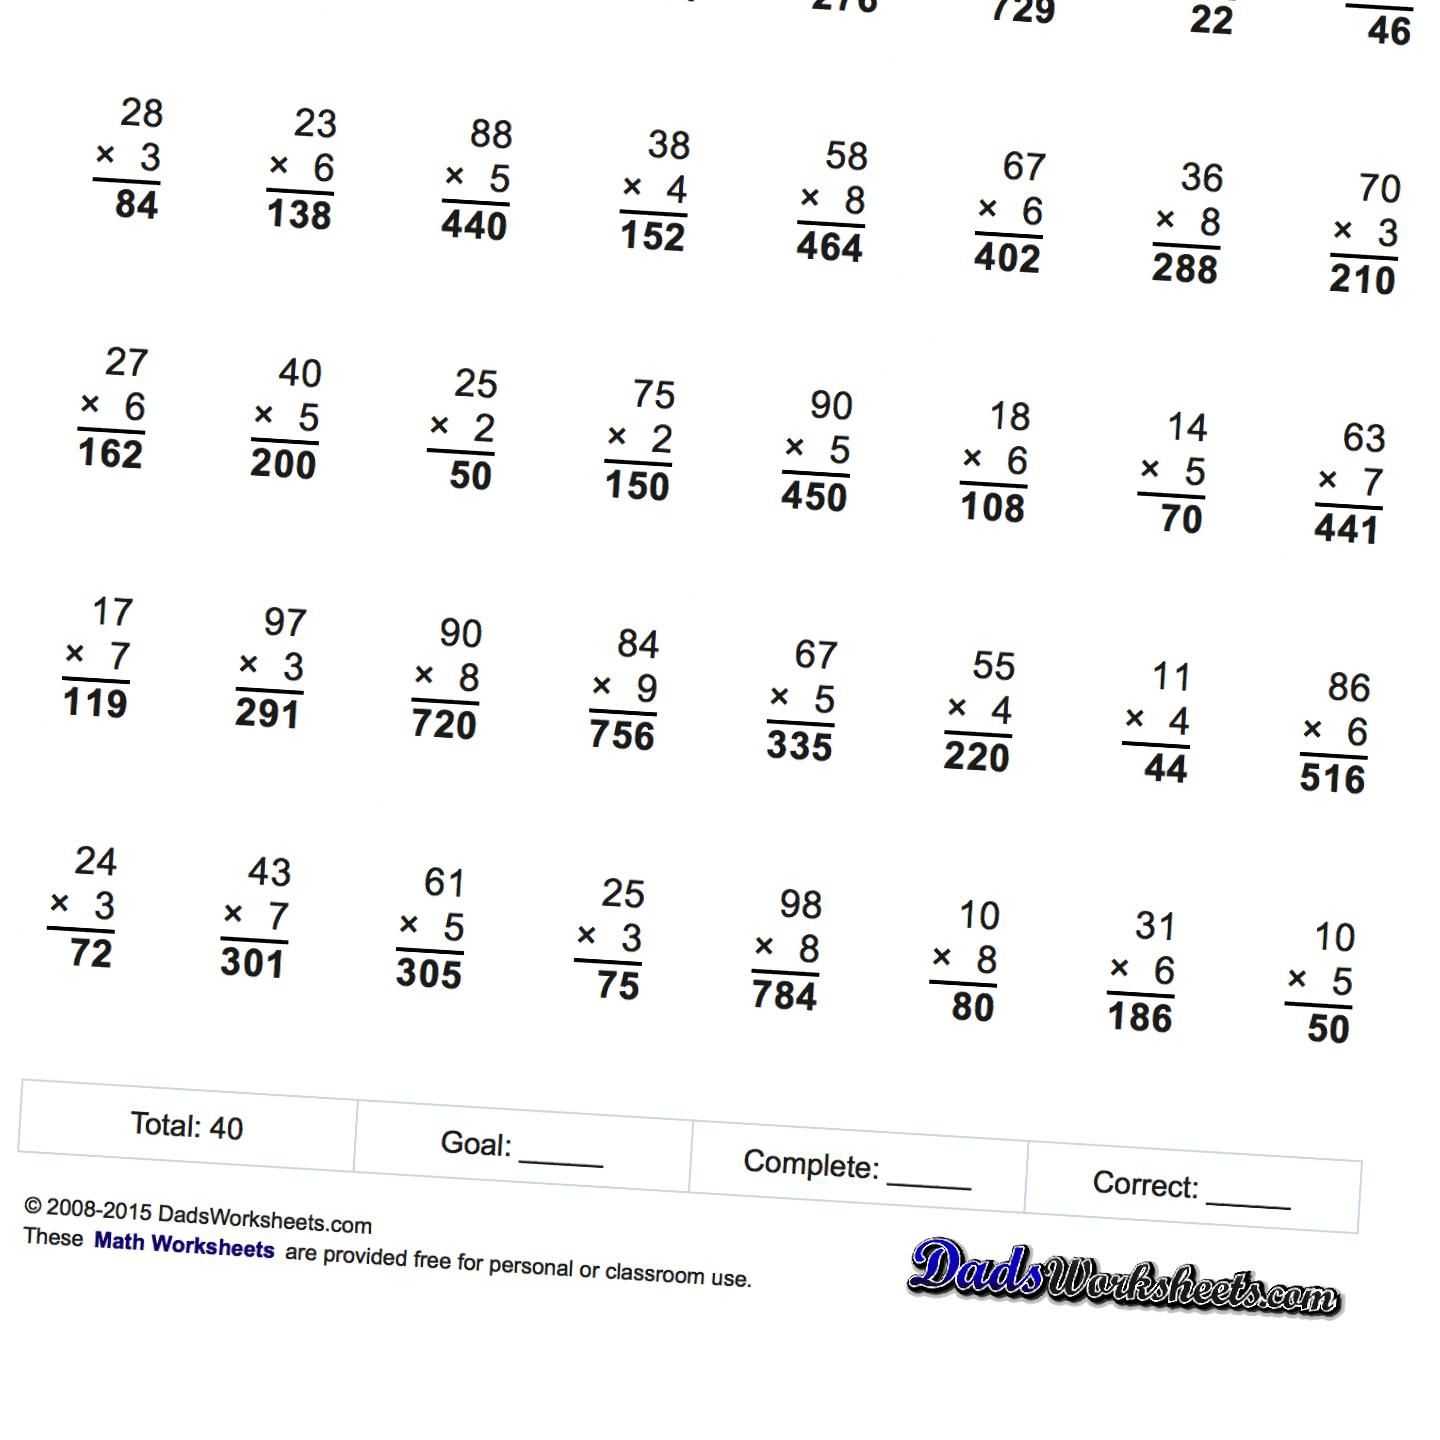 Addition and Subtraction Worksheets for Grade 1 or Multiple Digit Multiplication Worksheets there are Several Variants